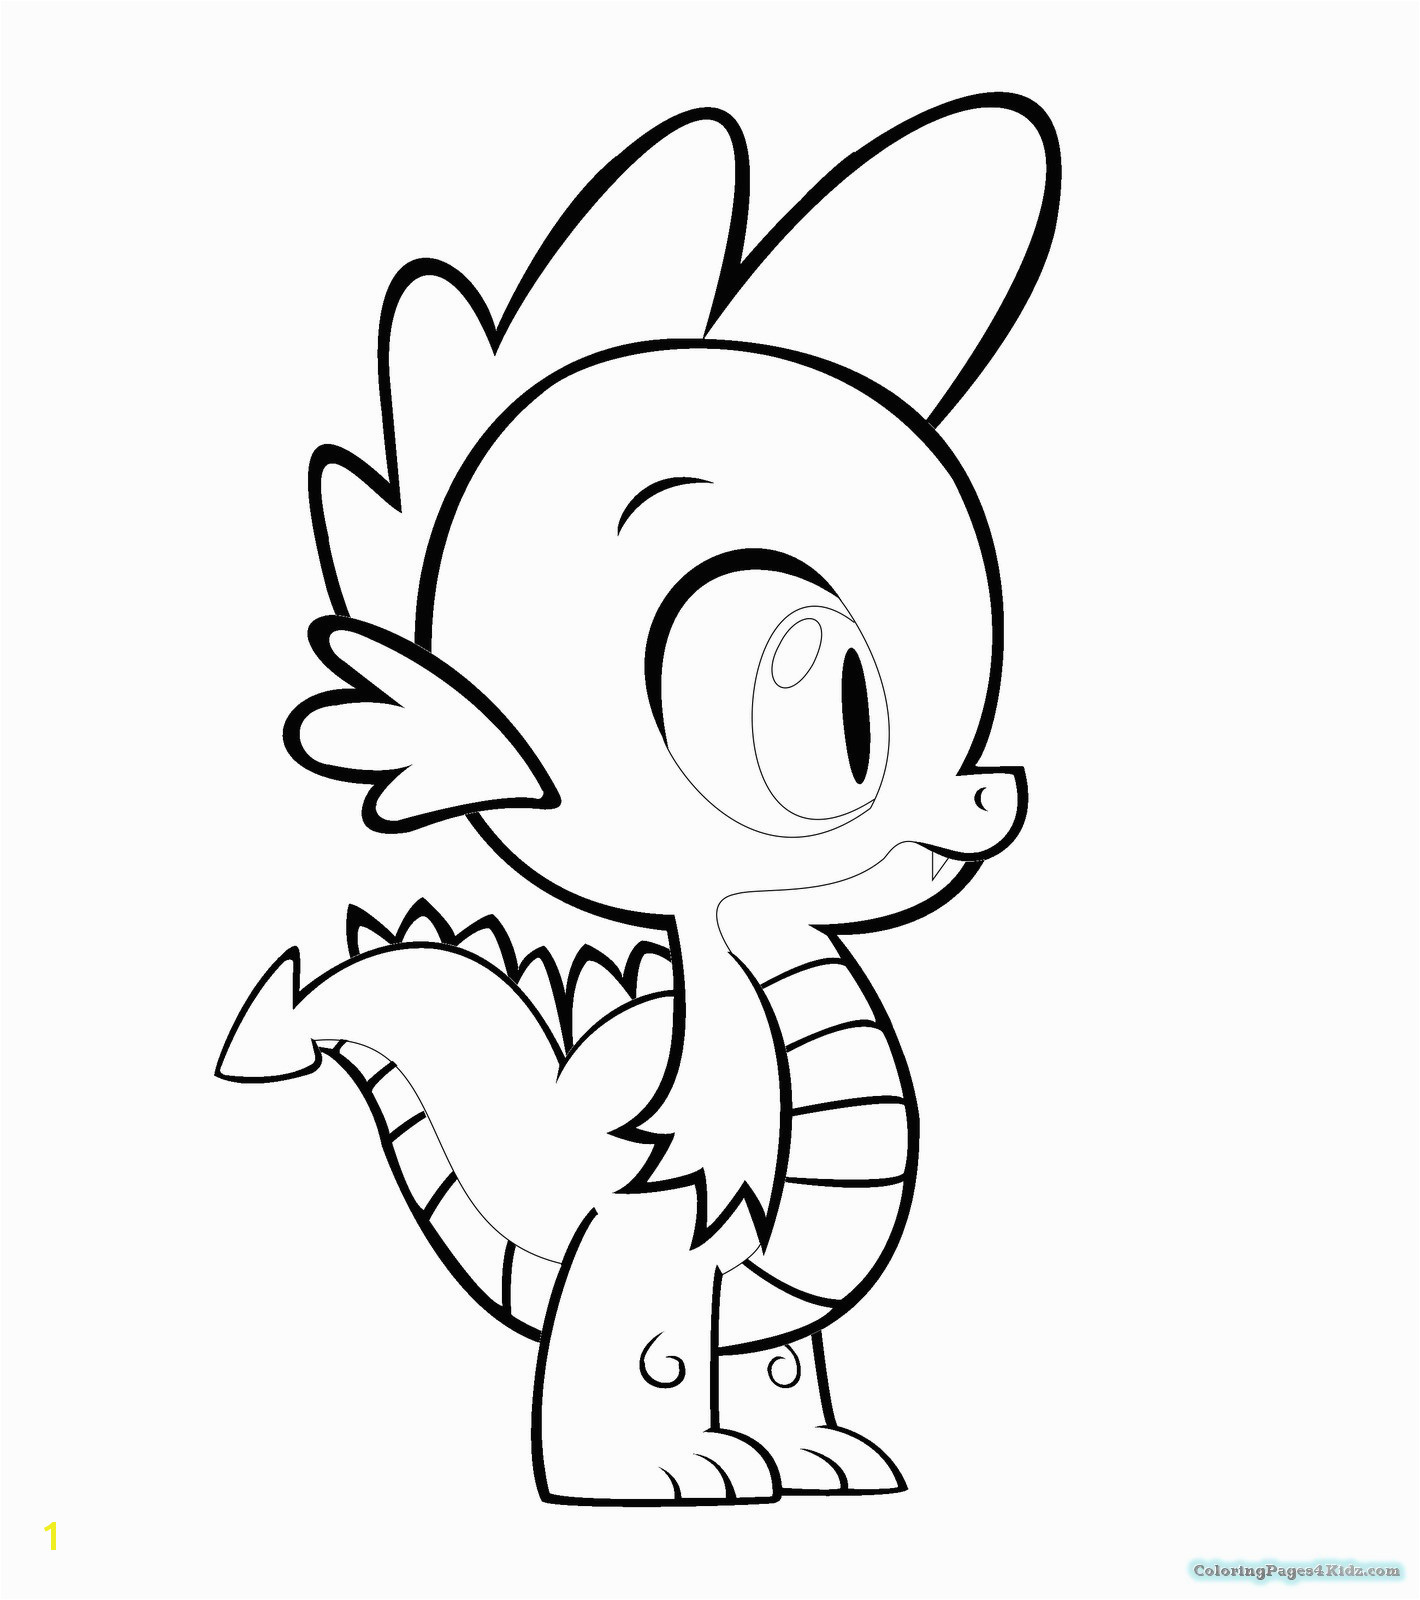 Spike the Dragon Coloring Pages Spike the Dragon Coloring Pages Coloring Pages Coloring Pages